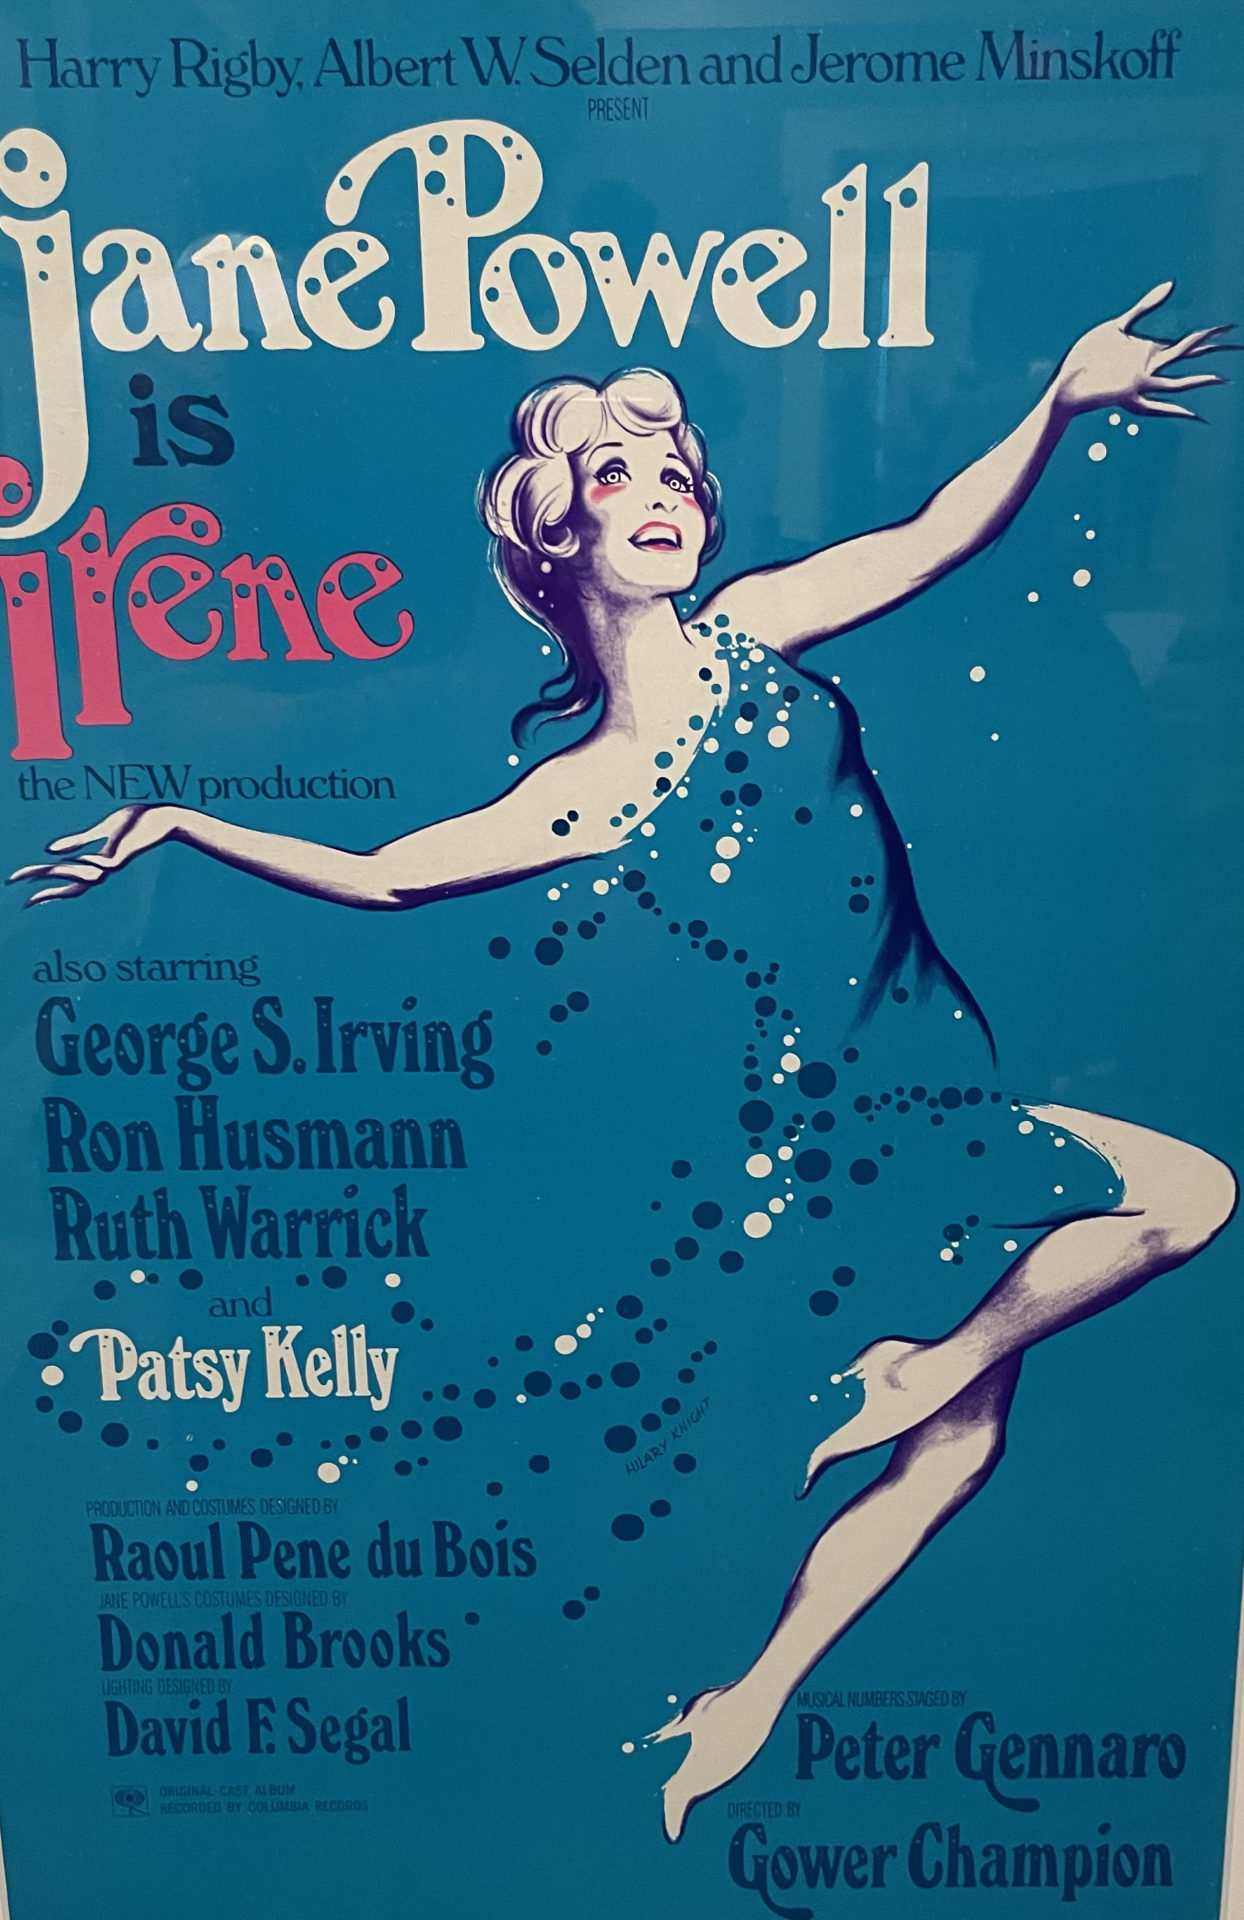 A Broadway poster shows Jane Powell dancing and singing in the musical Irene.